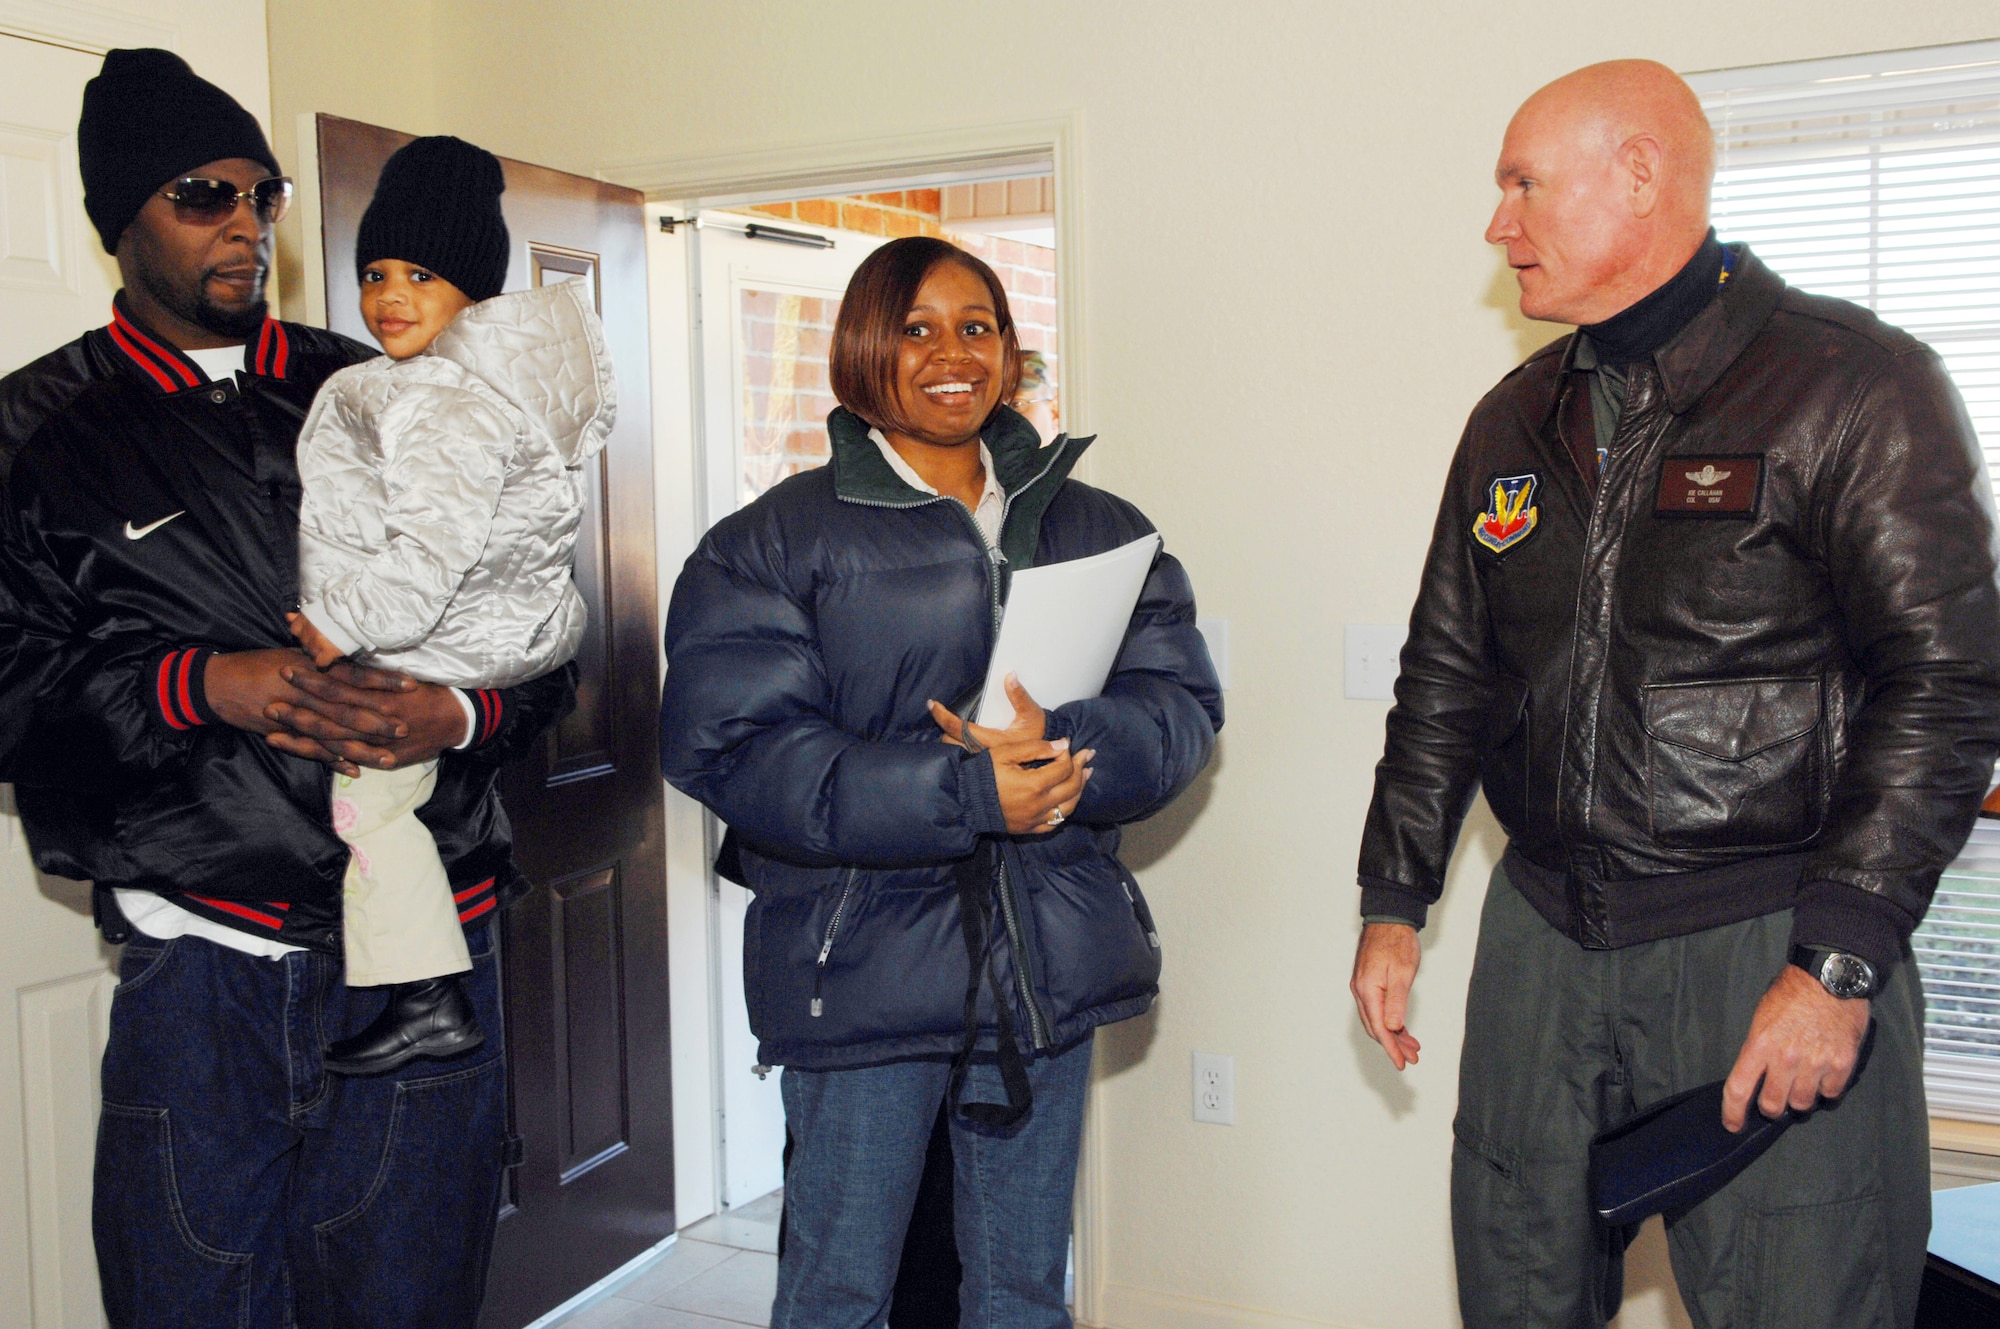 Col. Joe Callahan, 23rd Wing commander, shows Staff Sgt. Jessica Davis, 347th Operations Support Squadron, and her husband Calvin, their new base housing unit.  The 2,100 square-foot home is the first of 383 units to be built in Moody’s Magnolia Grove Housing area between now and December 2007. (U.S. Air Force photo by Airman 1st Class Gina Chiaverotti)  
